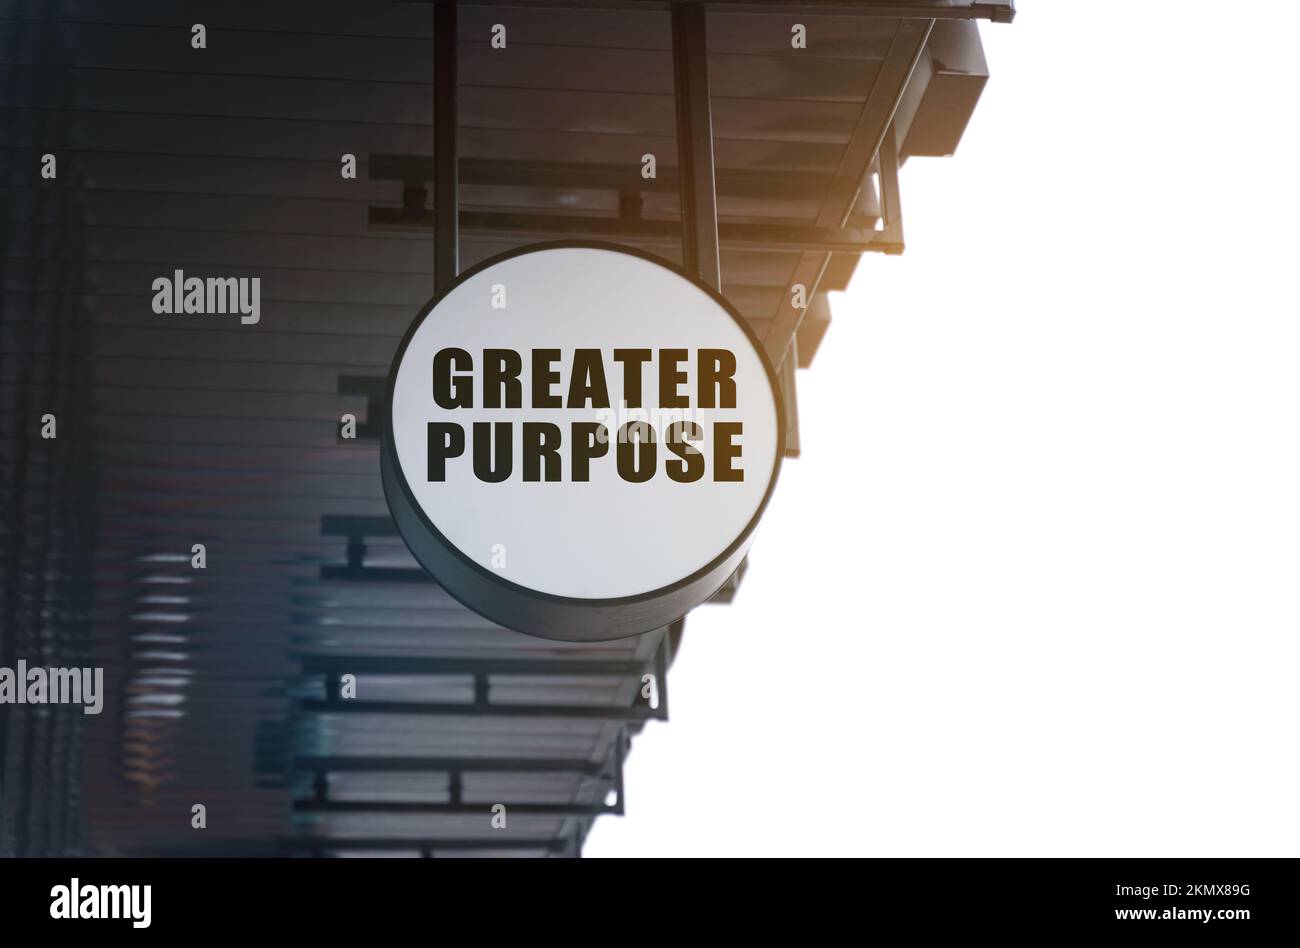 Business and Economics. There is a circular sign under the roof of the building that says - Greater Purpose Stock Photo